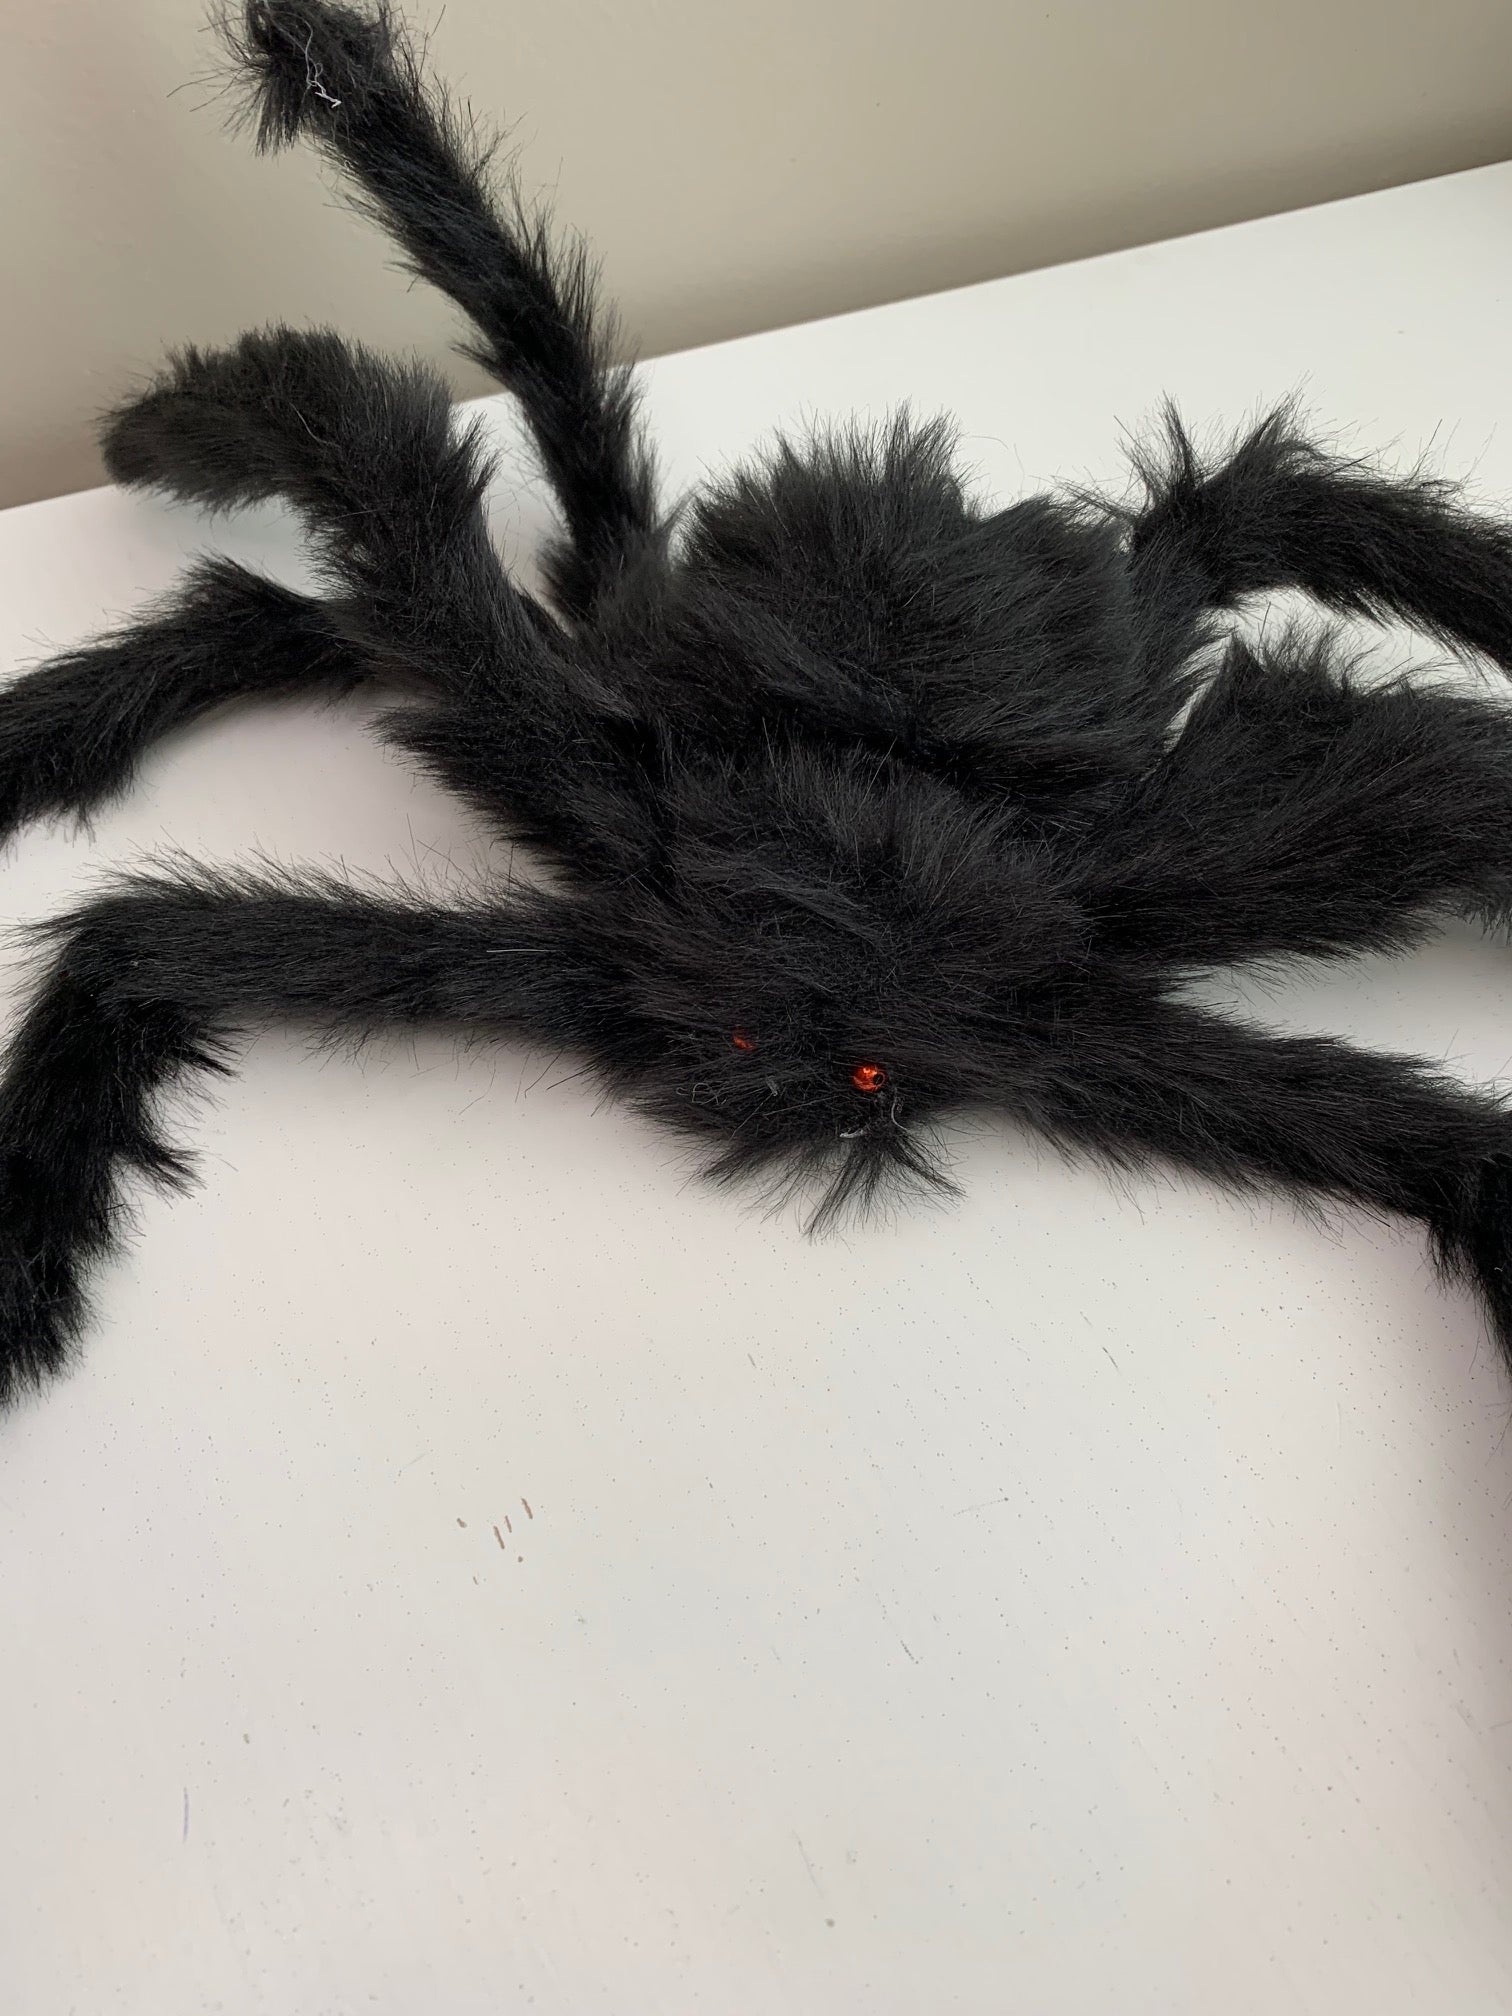 Large party spider